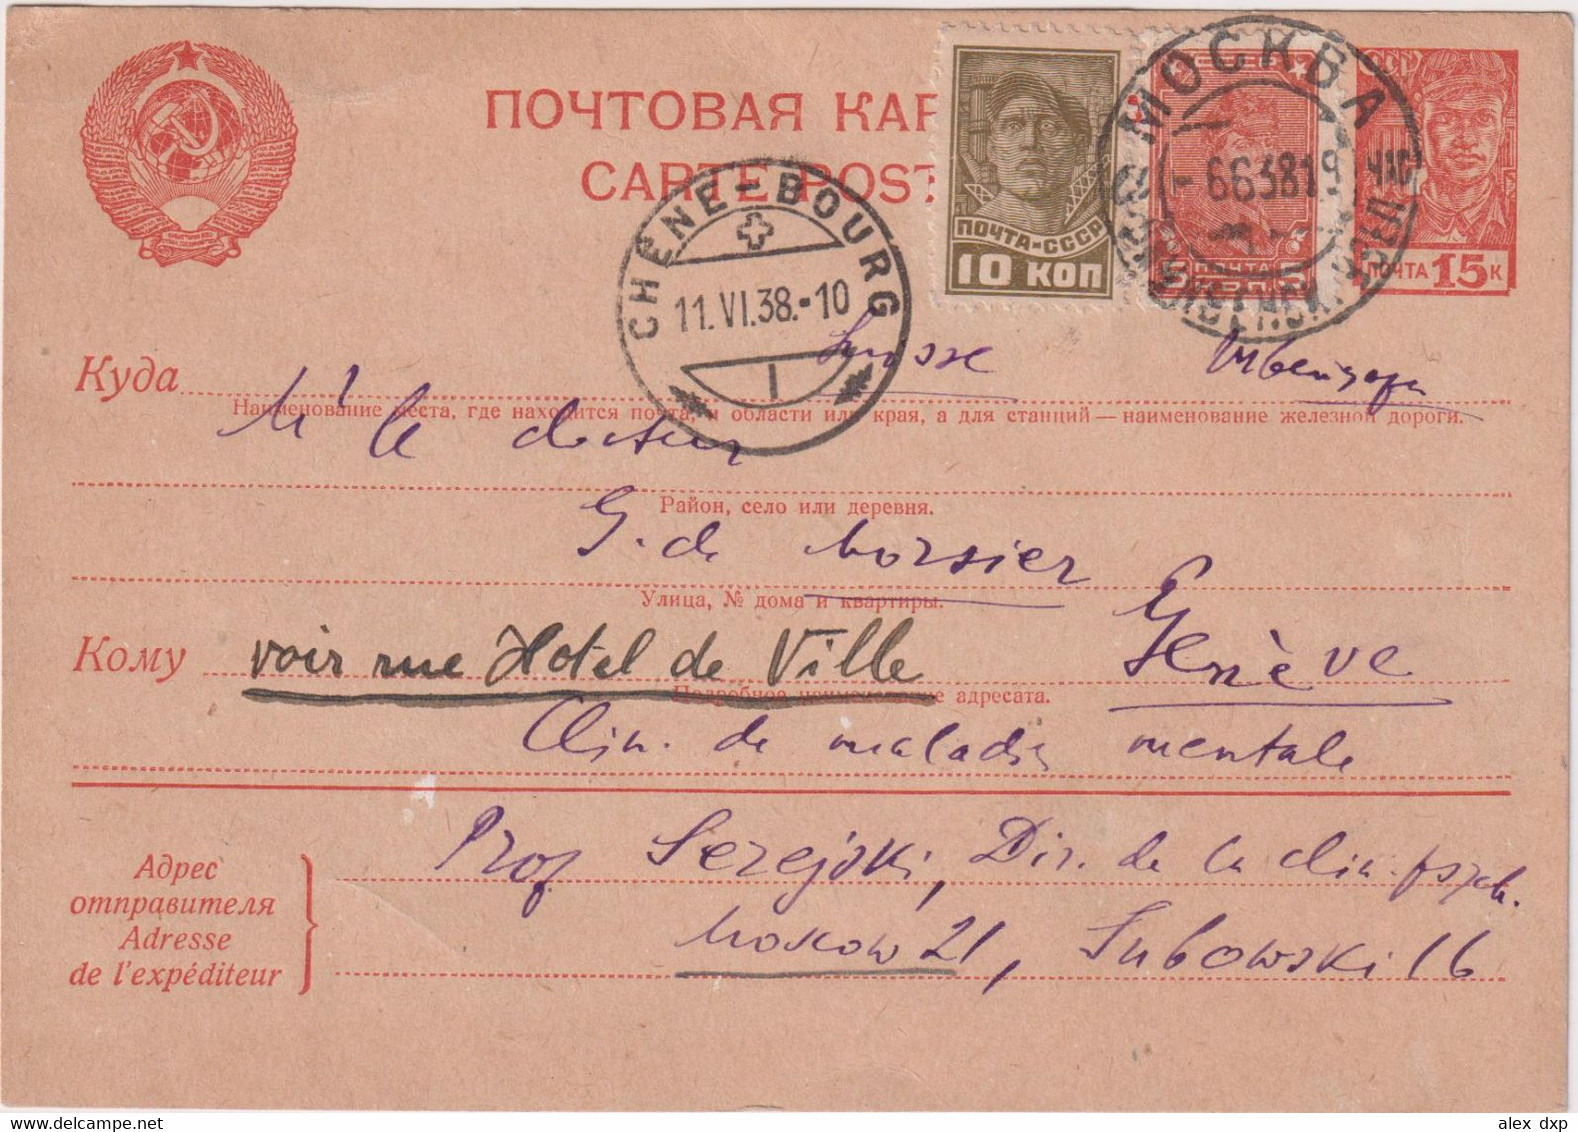 RUSSIA (USSR) > 1938 POSTAL HISTORY > POSTAL STATIONARY CARD (W/2 ADDED STAMPS) FROM MOSCOW TO GENEVE. SWITZERLAND - Lettres & Documents